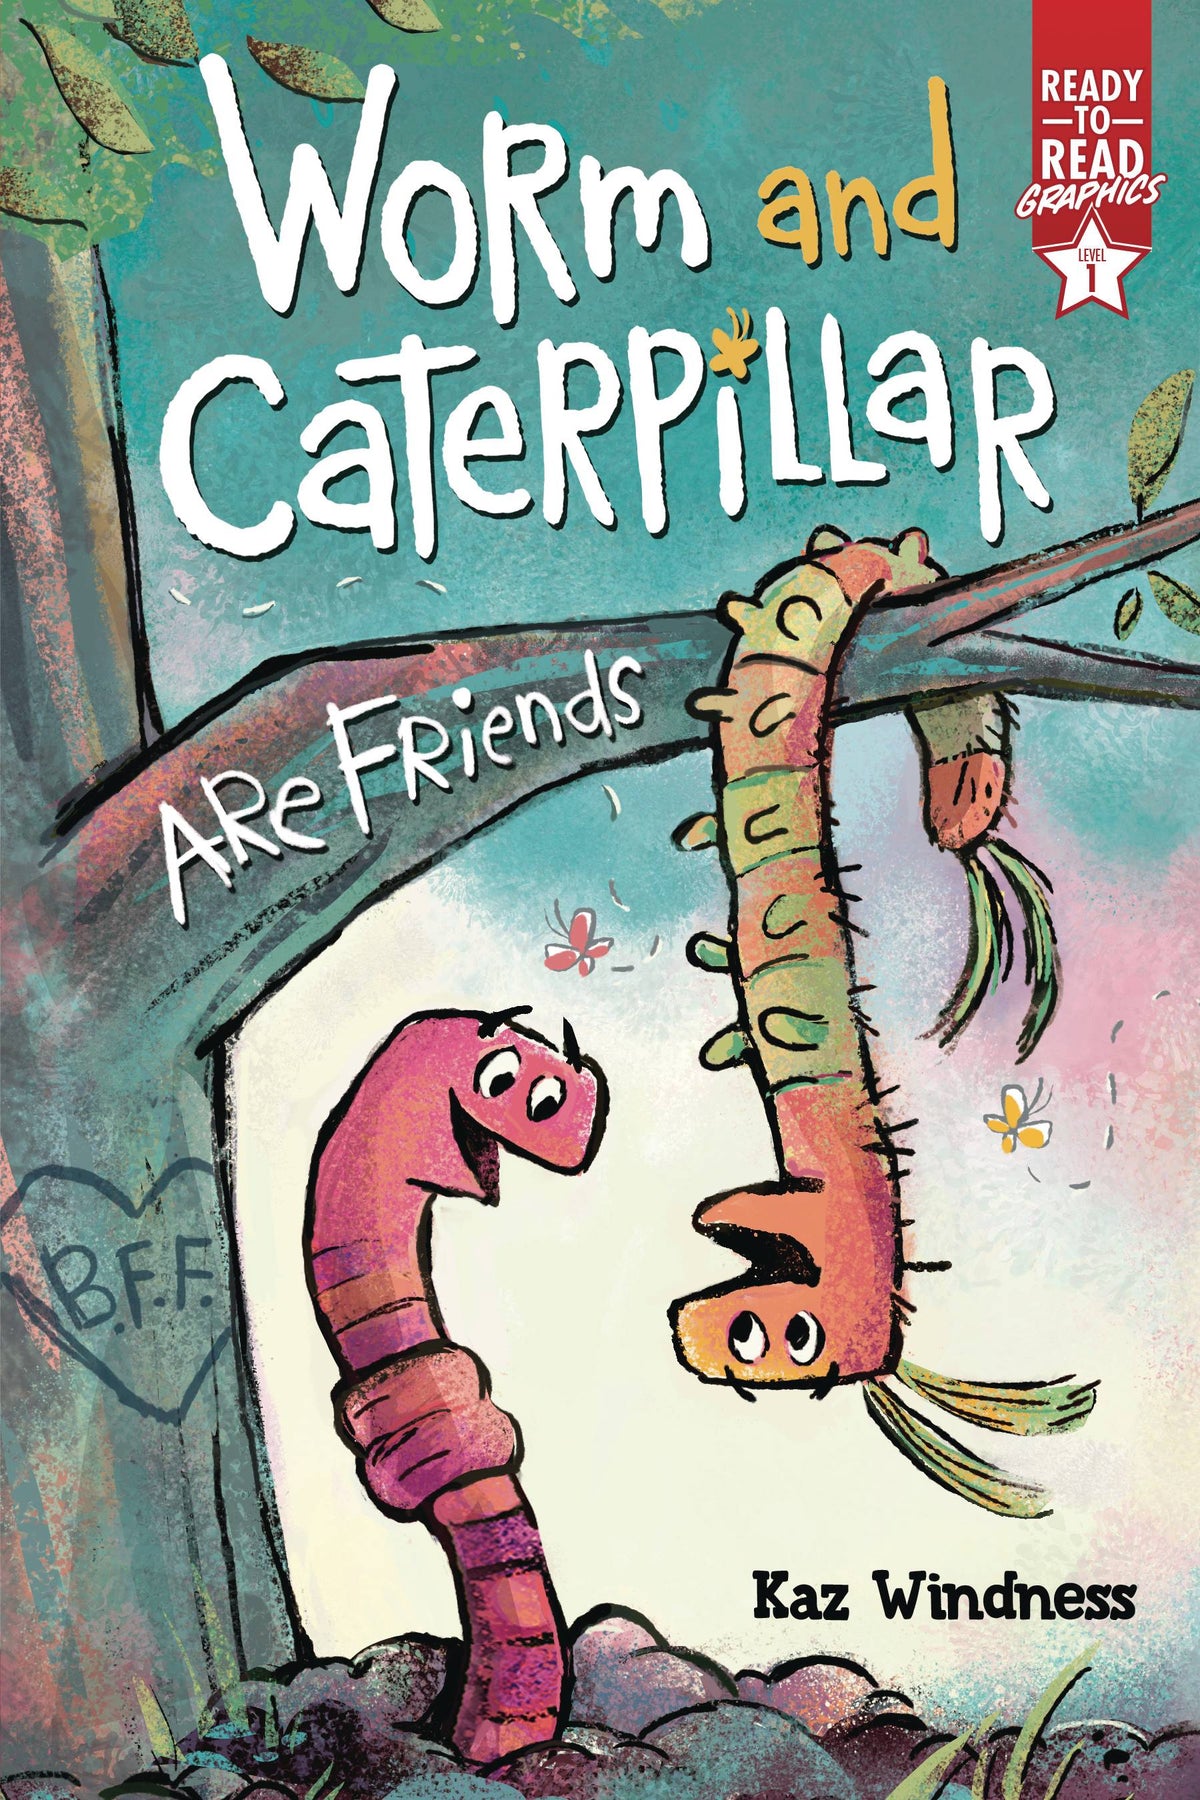 WORM AND CATERPILLAR ARE FRIEND READY TO READ GN - Third Eye